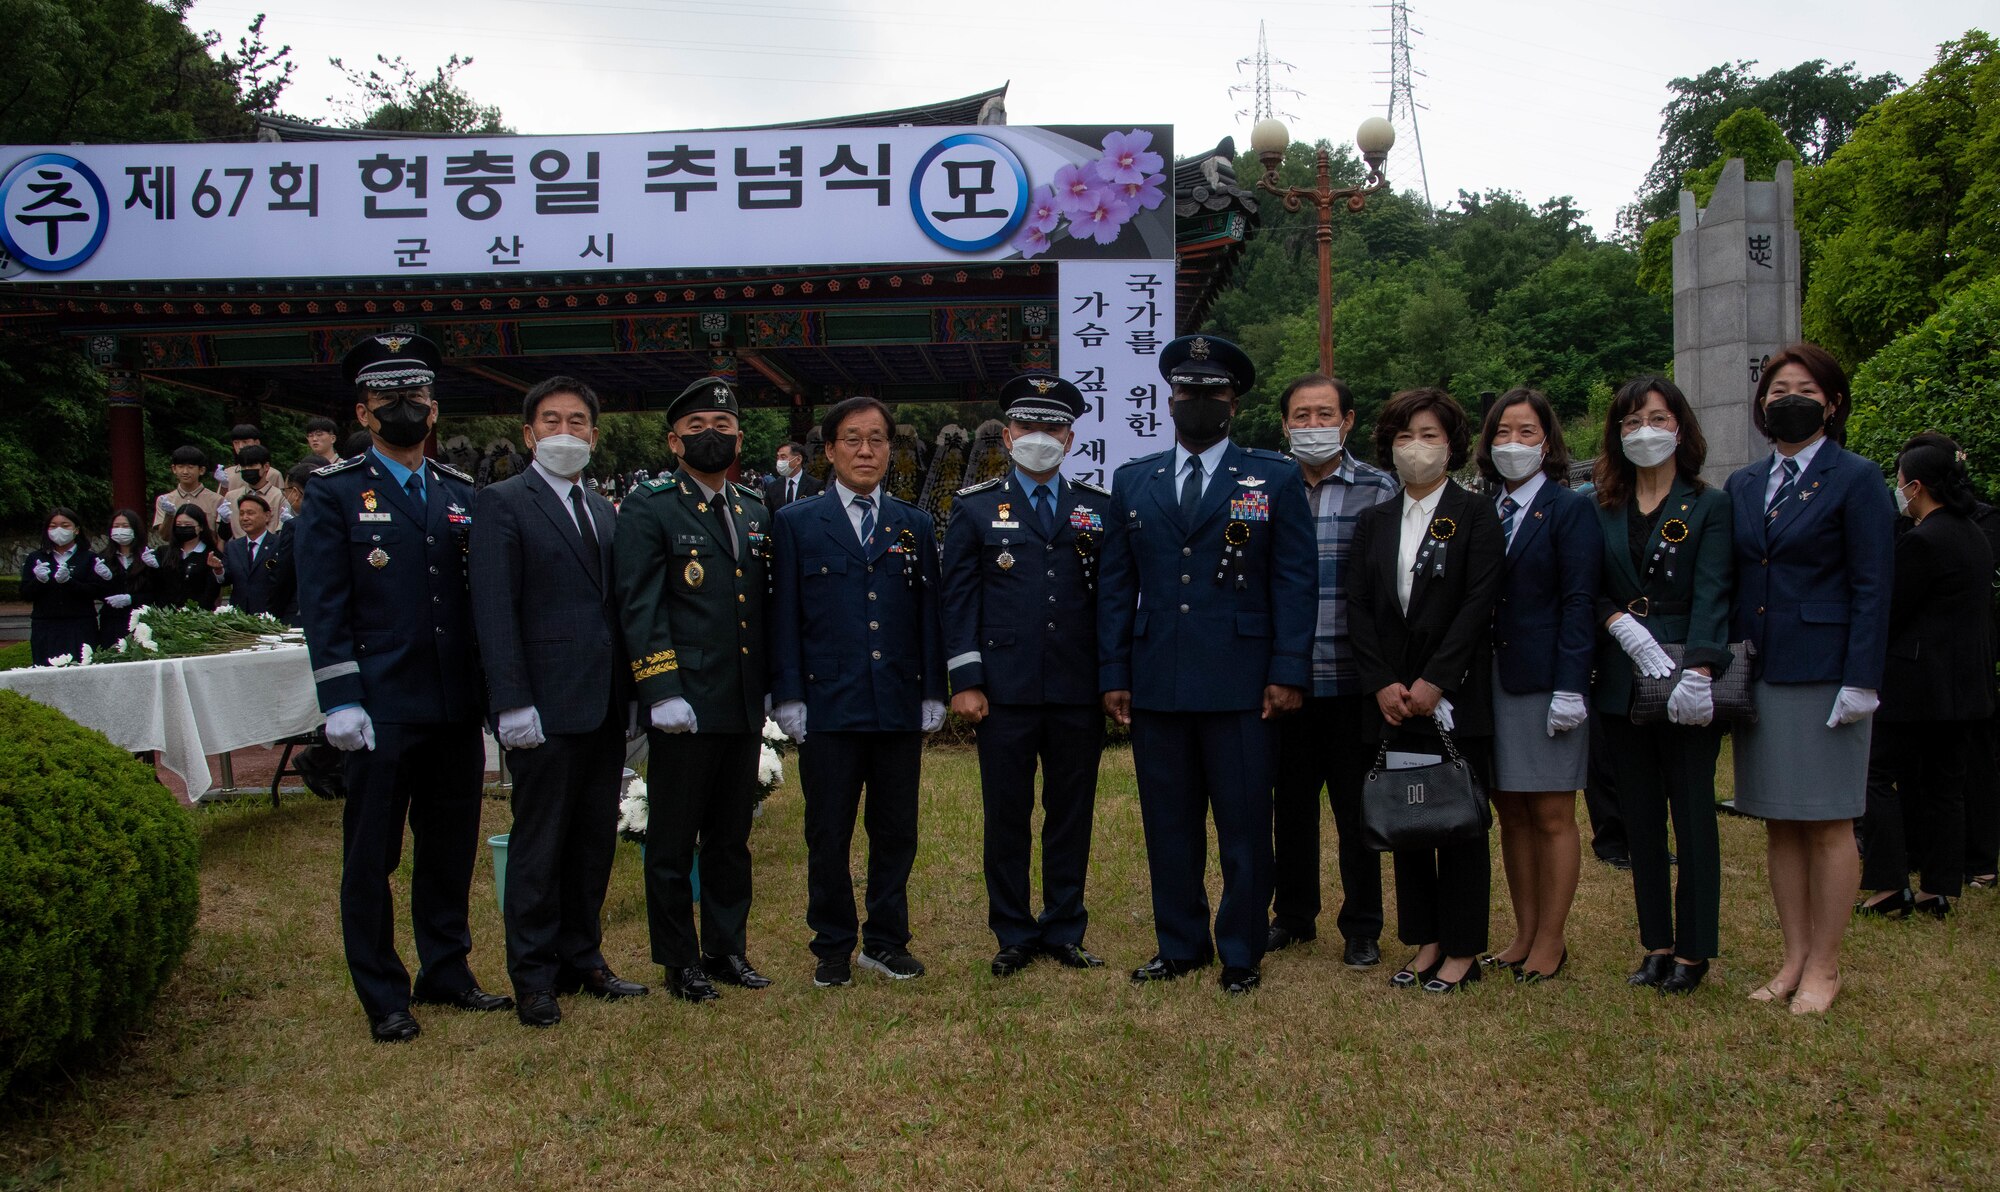 Military members and government officials pose for a photo